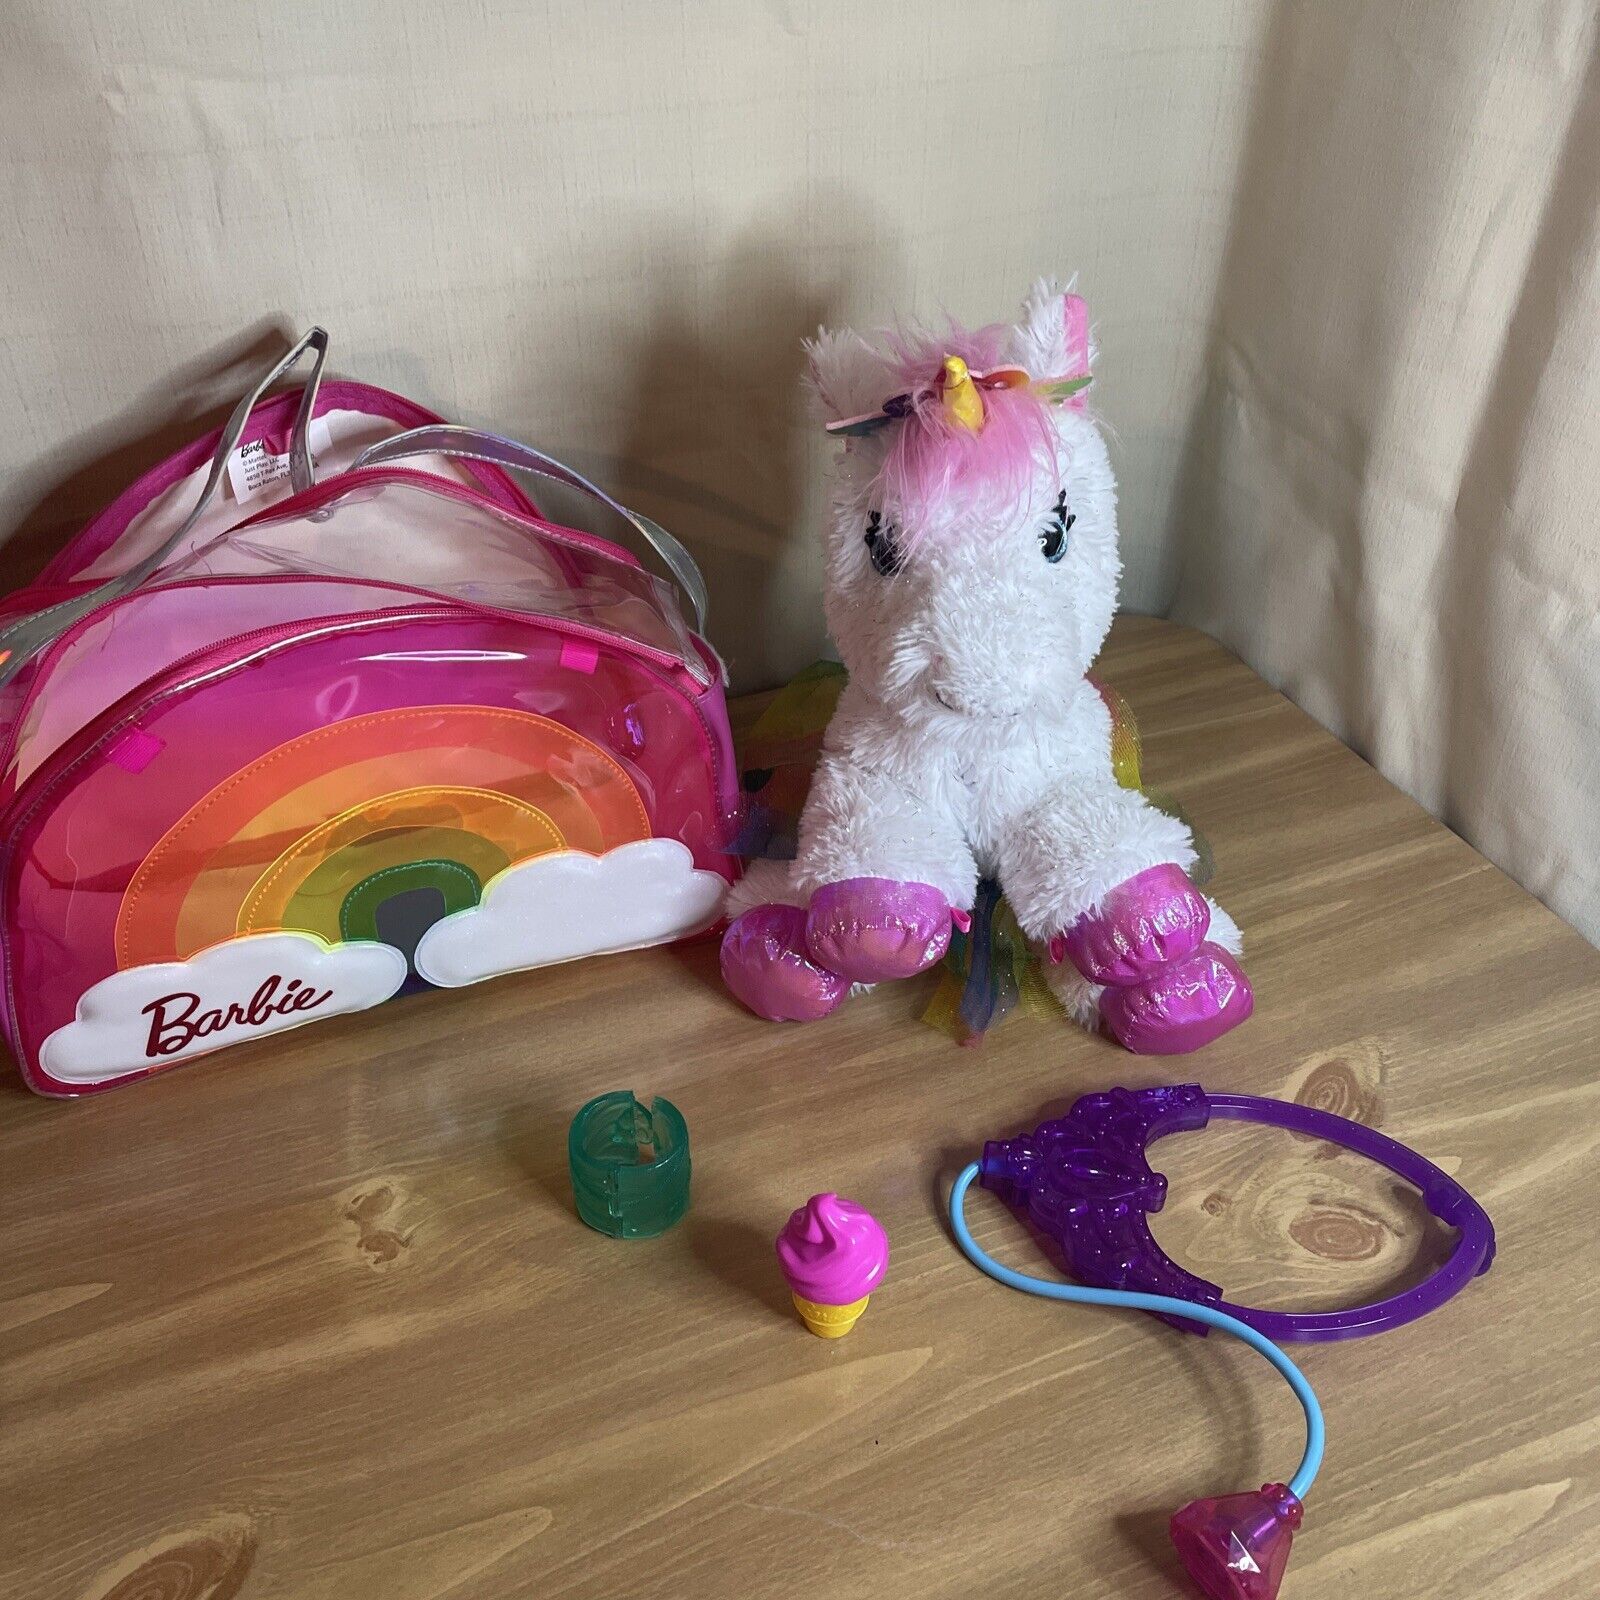 Barbie Unicorn Plush Dreamtopia Pet excellence Surprise price Doctor & With Sound Light By